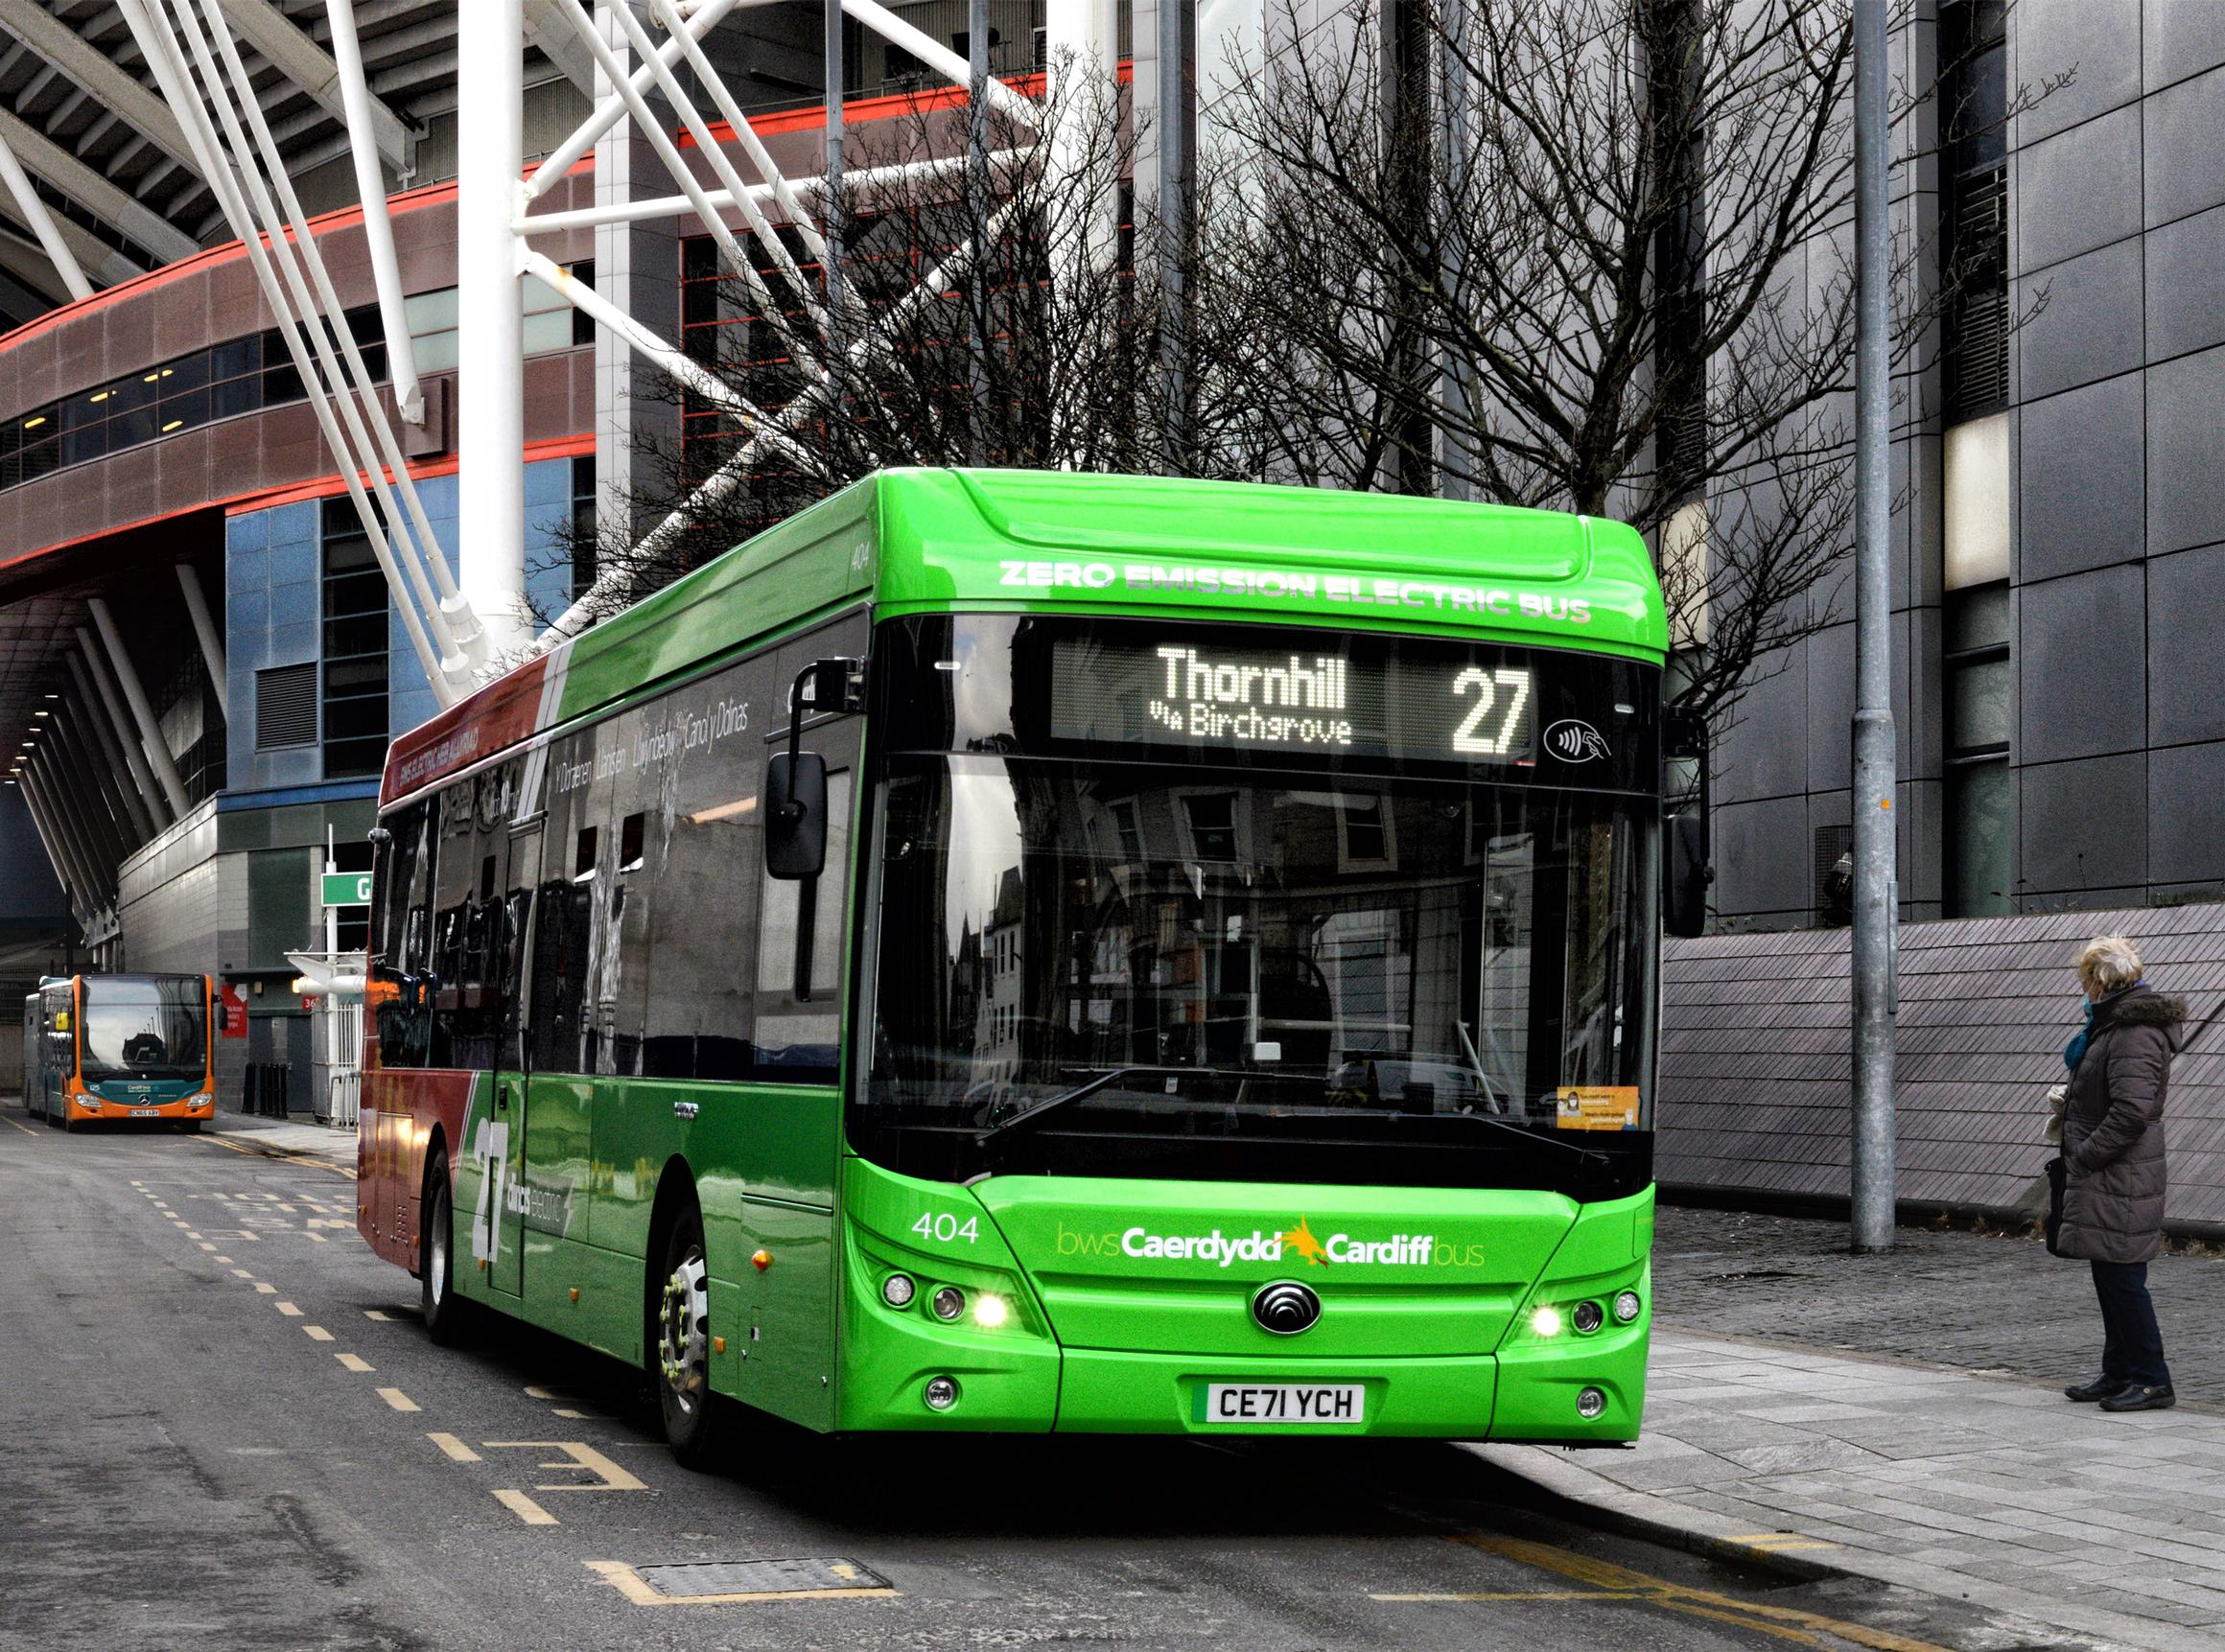 Cardiff Bus has purchased a fleet of electric buses